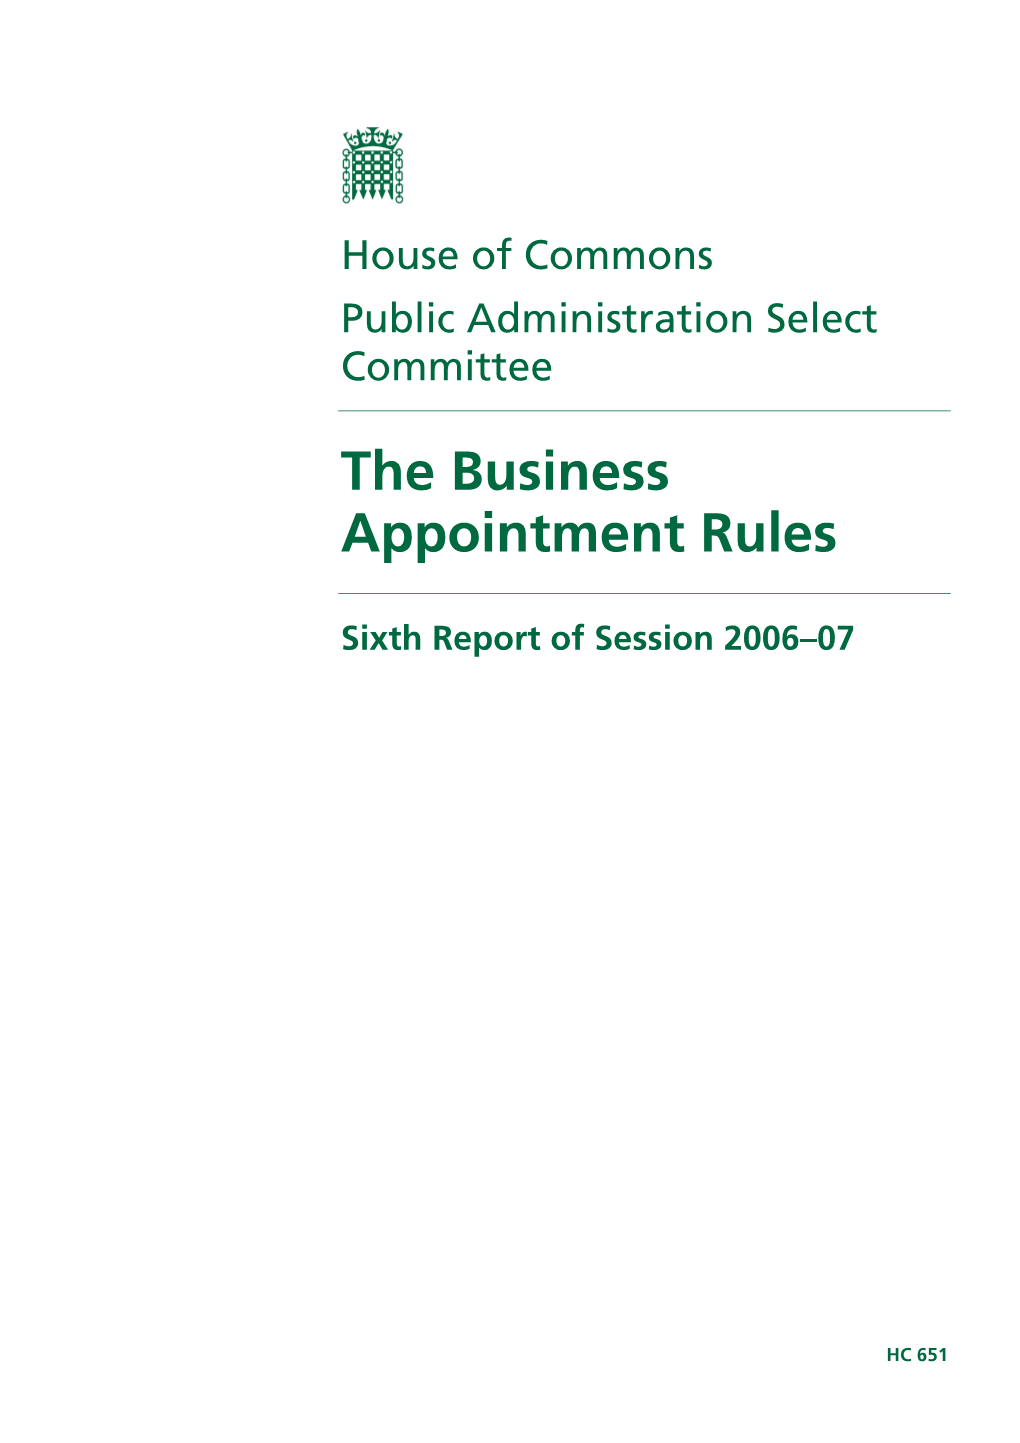 The Business Appointment Rules